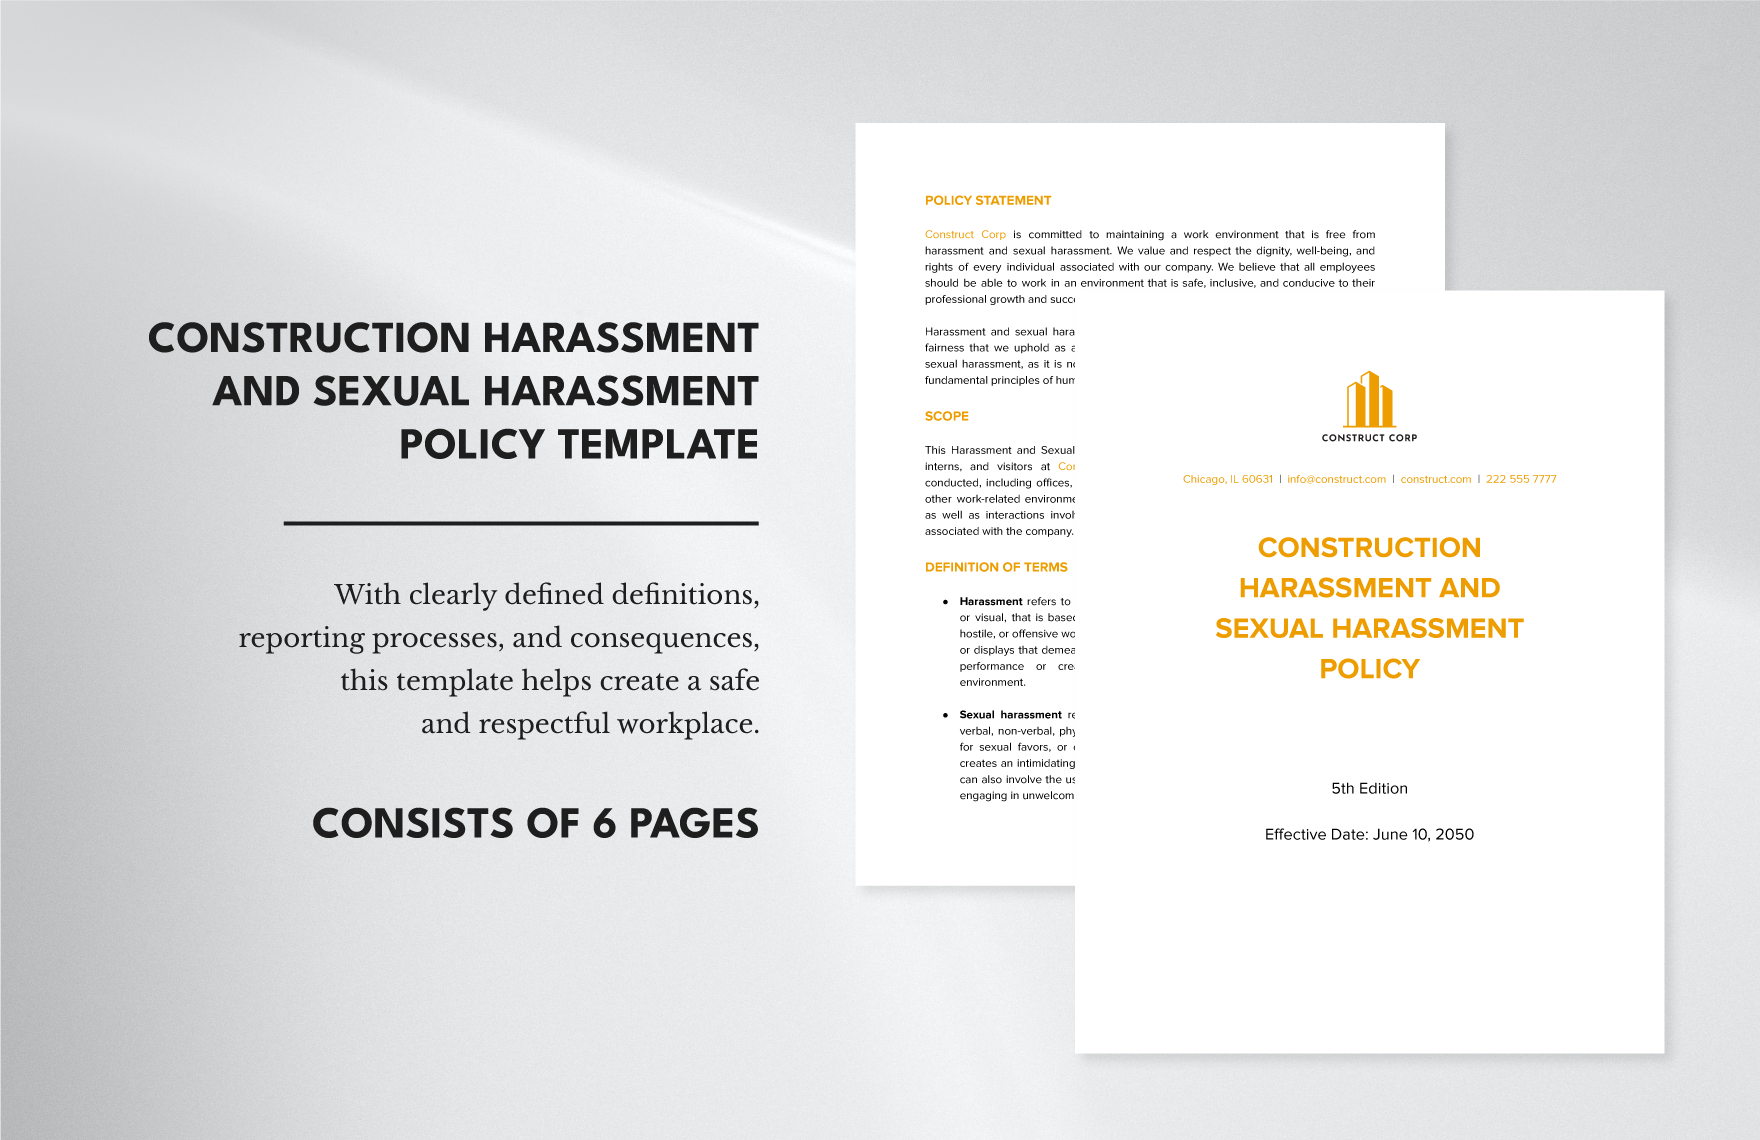 Construction Harassment and Sexual Harassment Policy Template